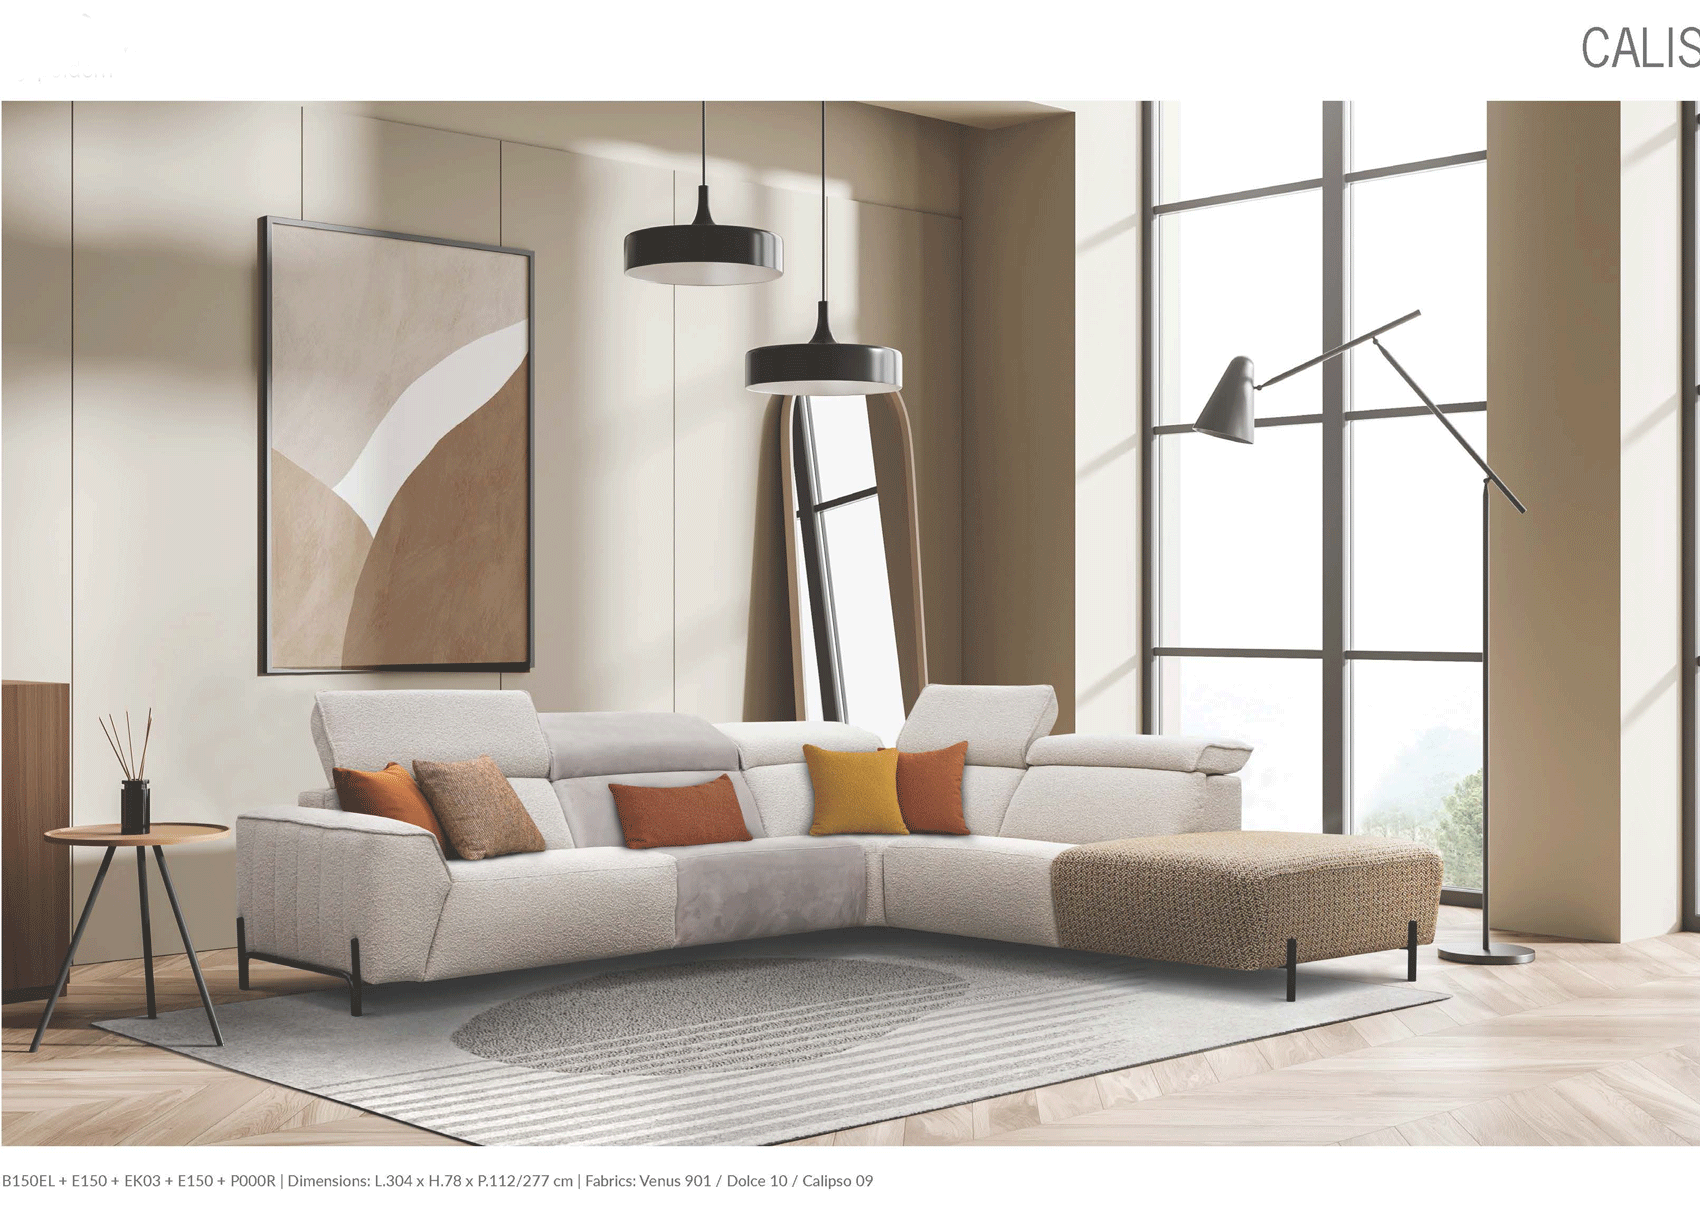 Bedroom Furniture Modern Bedrooms QS and KS Calis Sectional